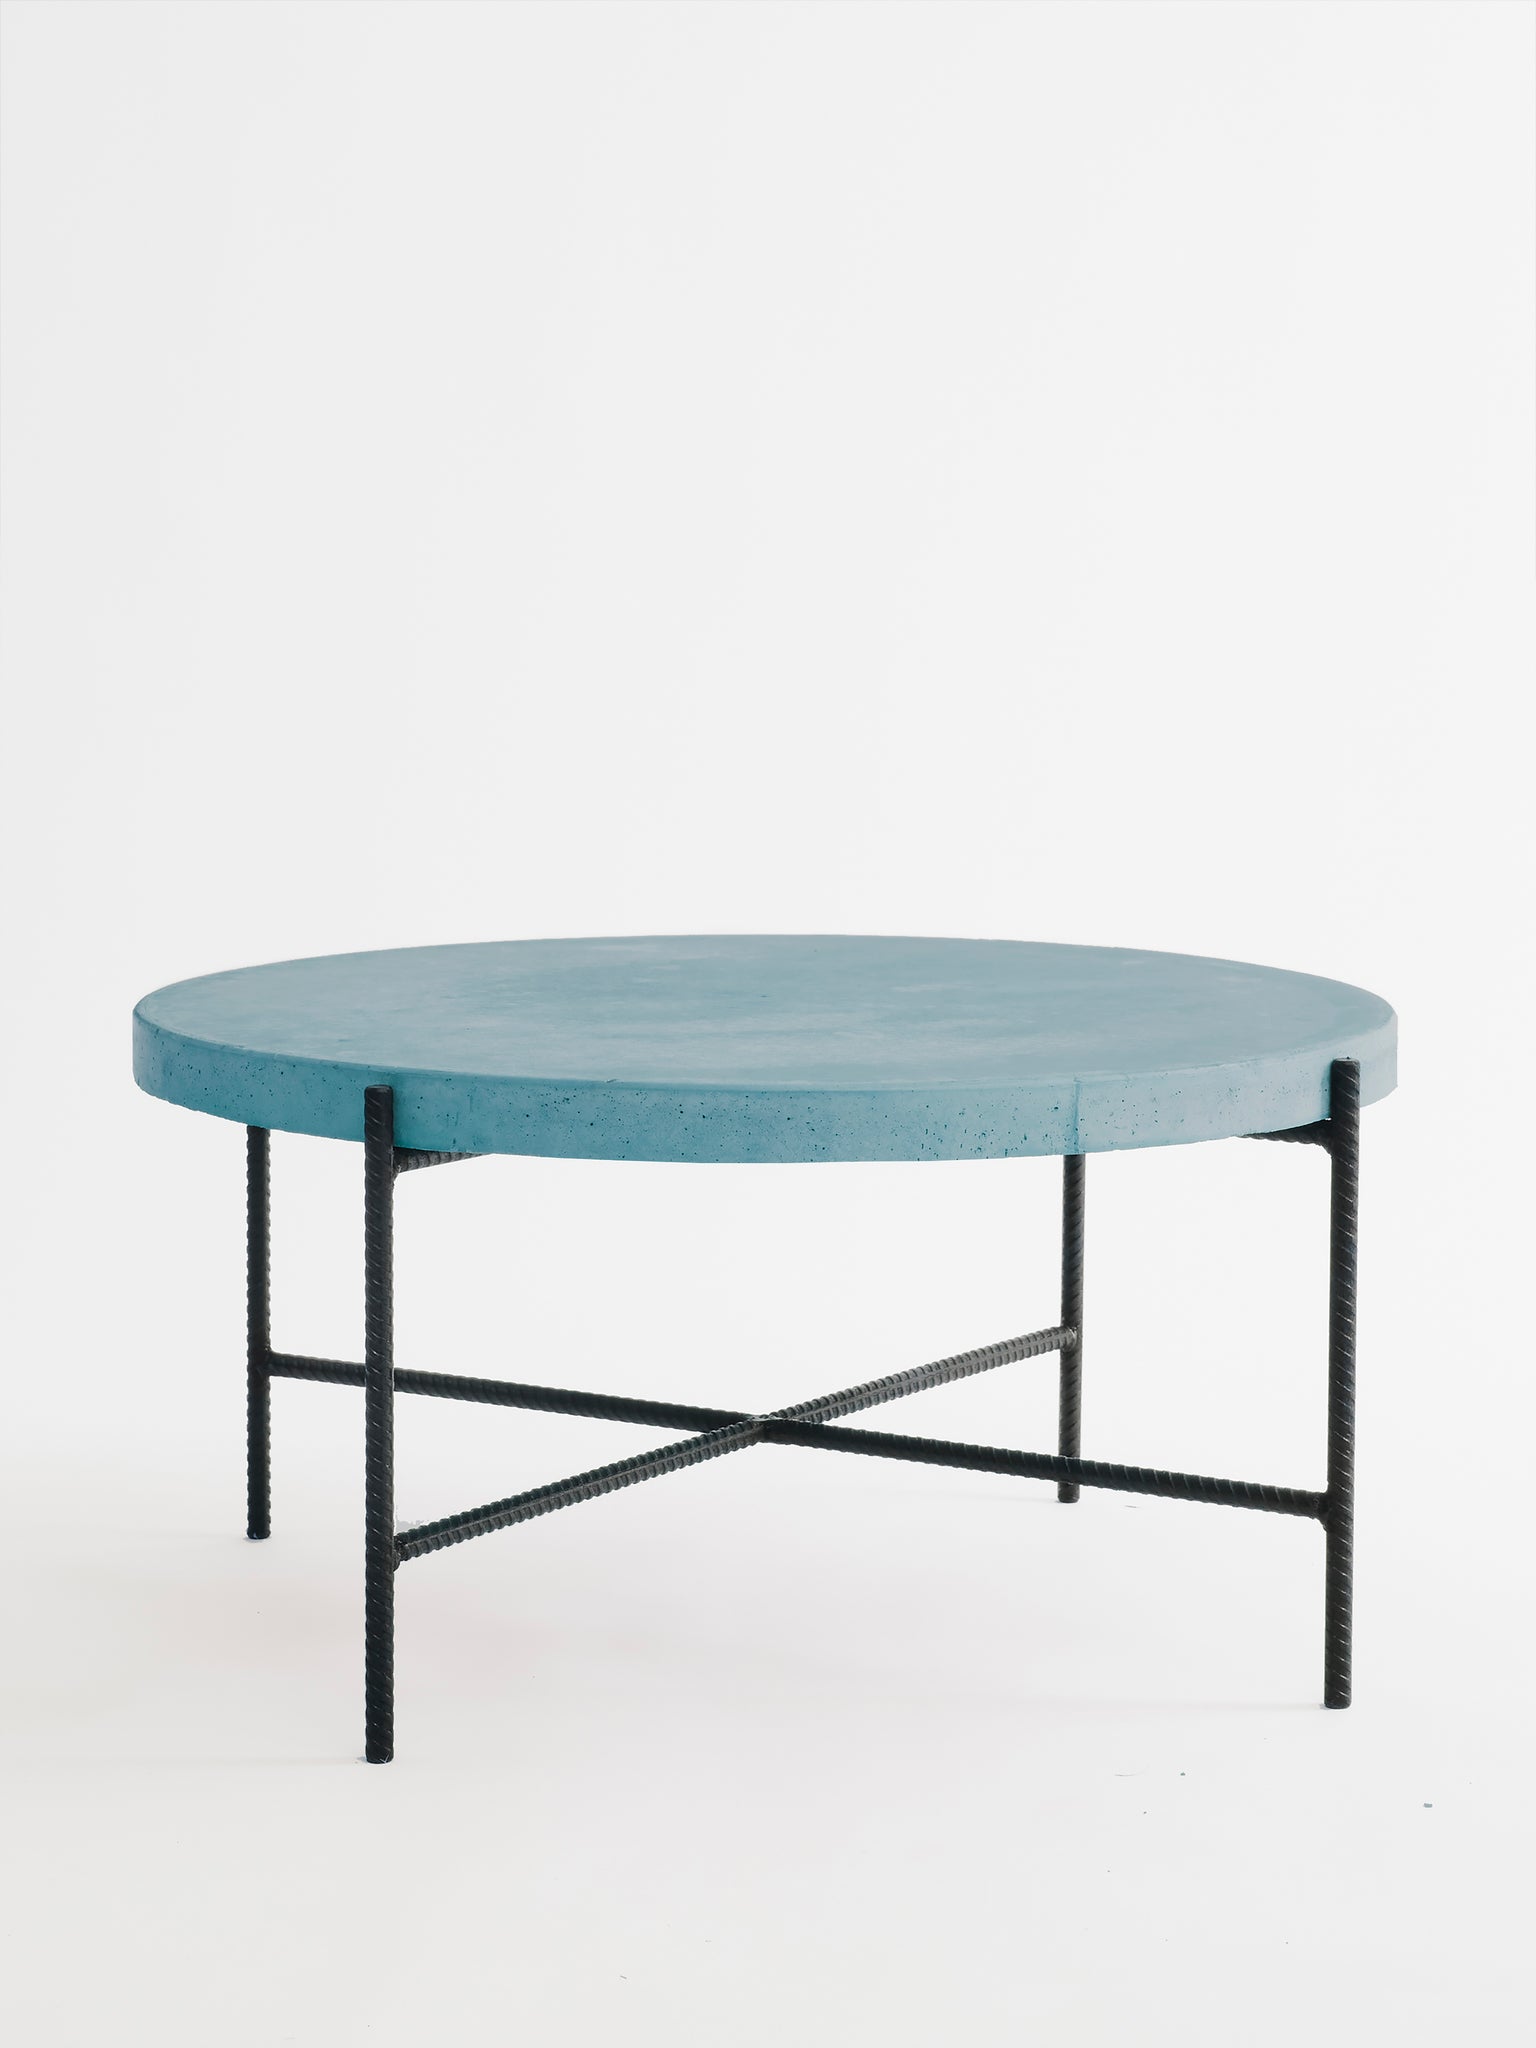 Off-Form table, Steel